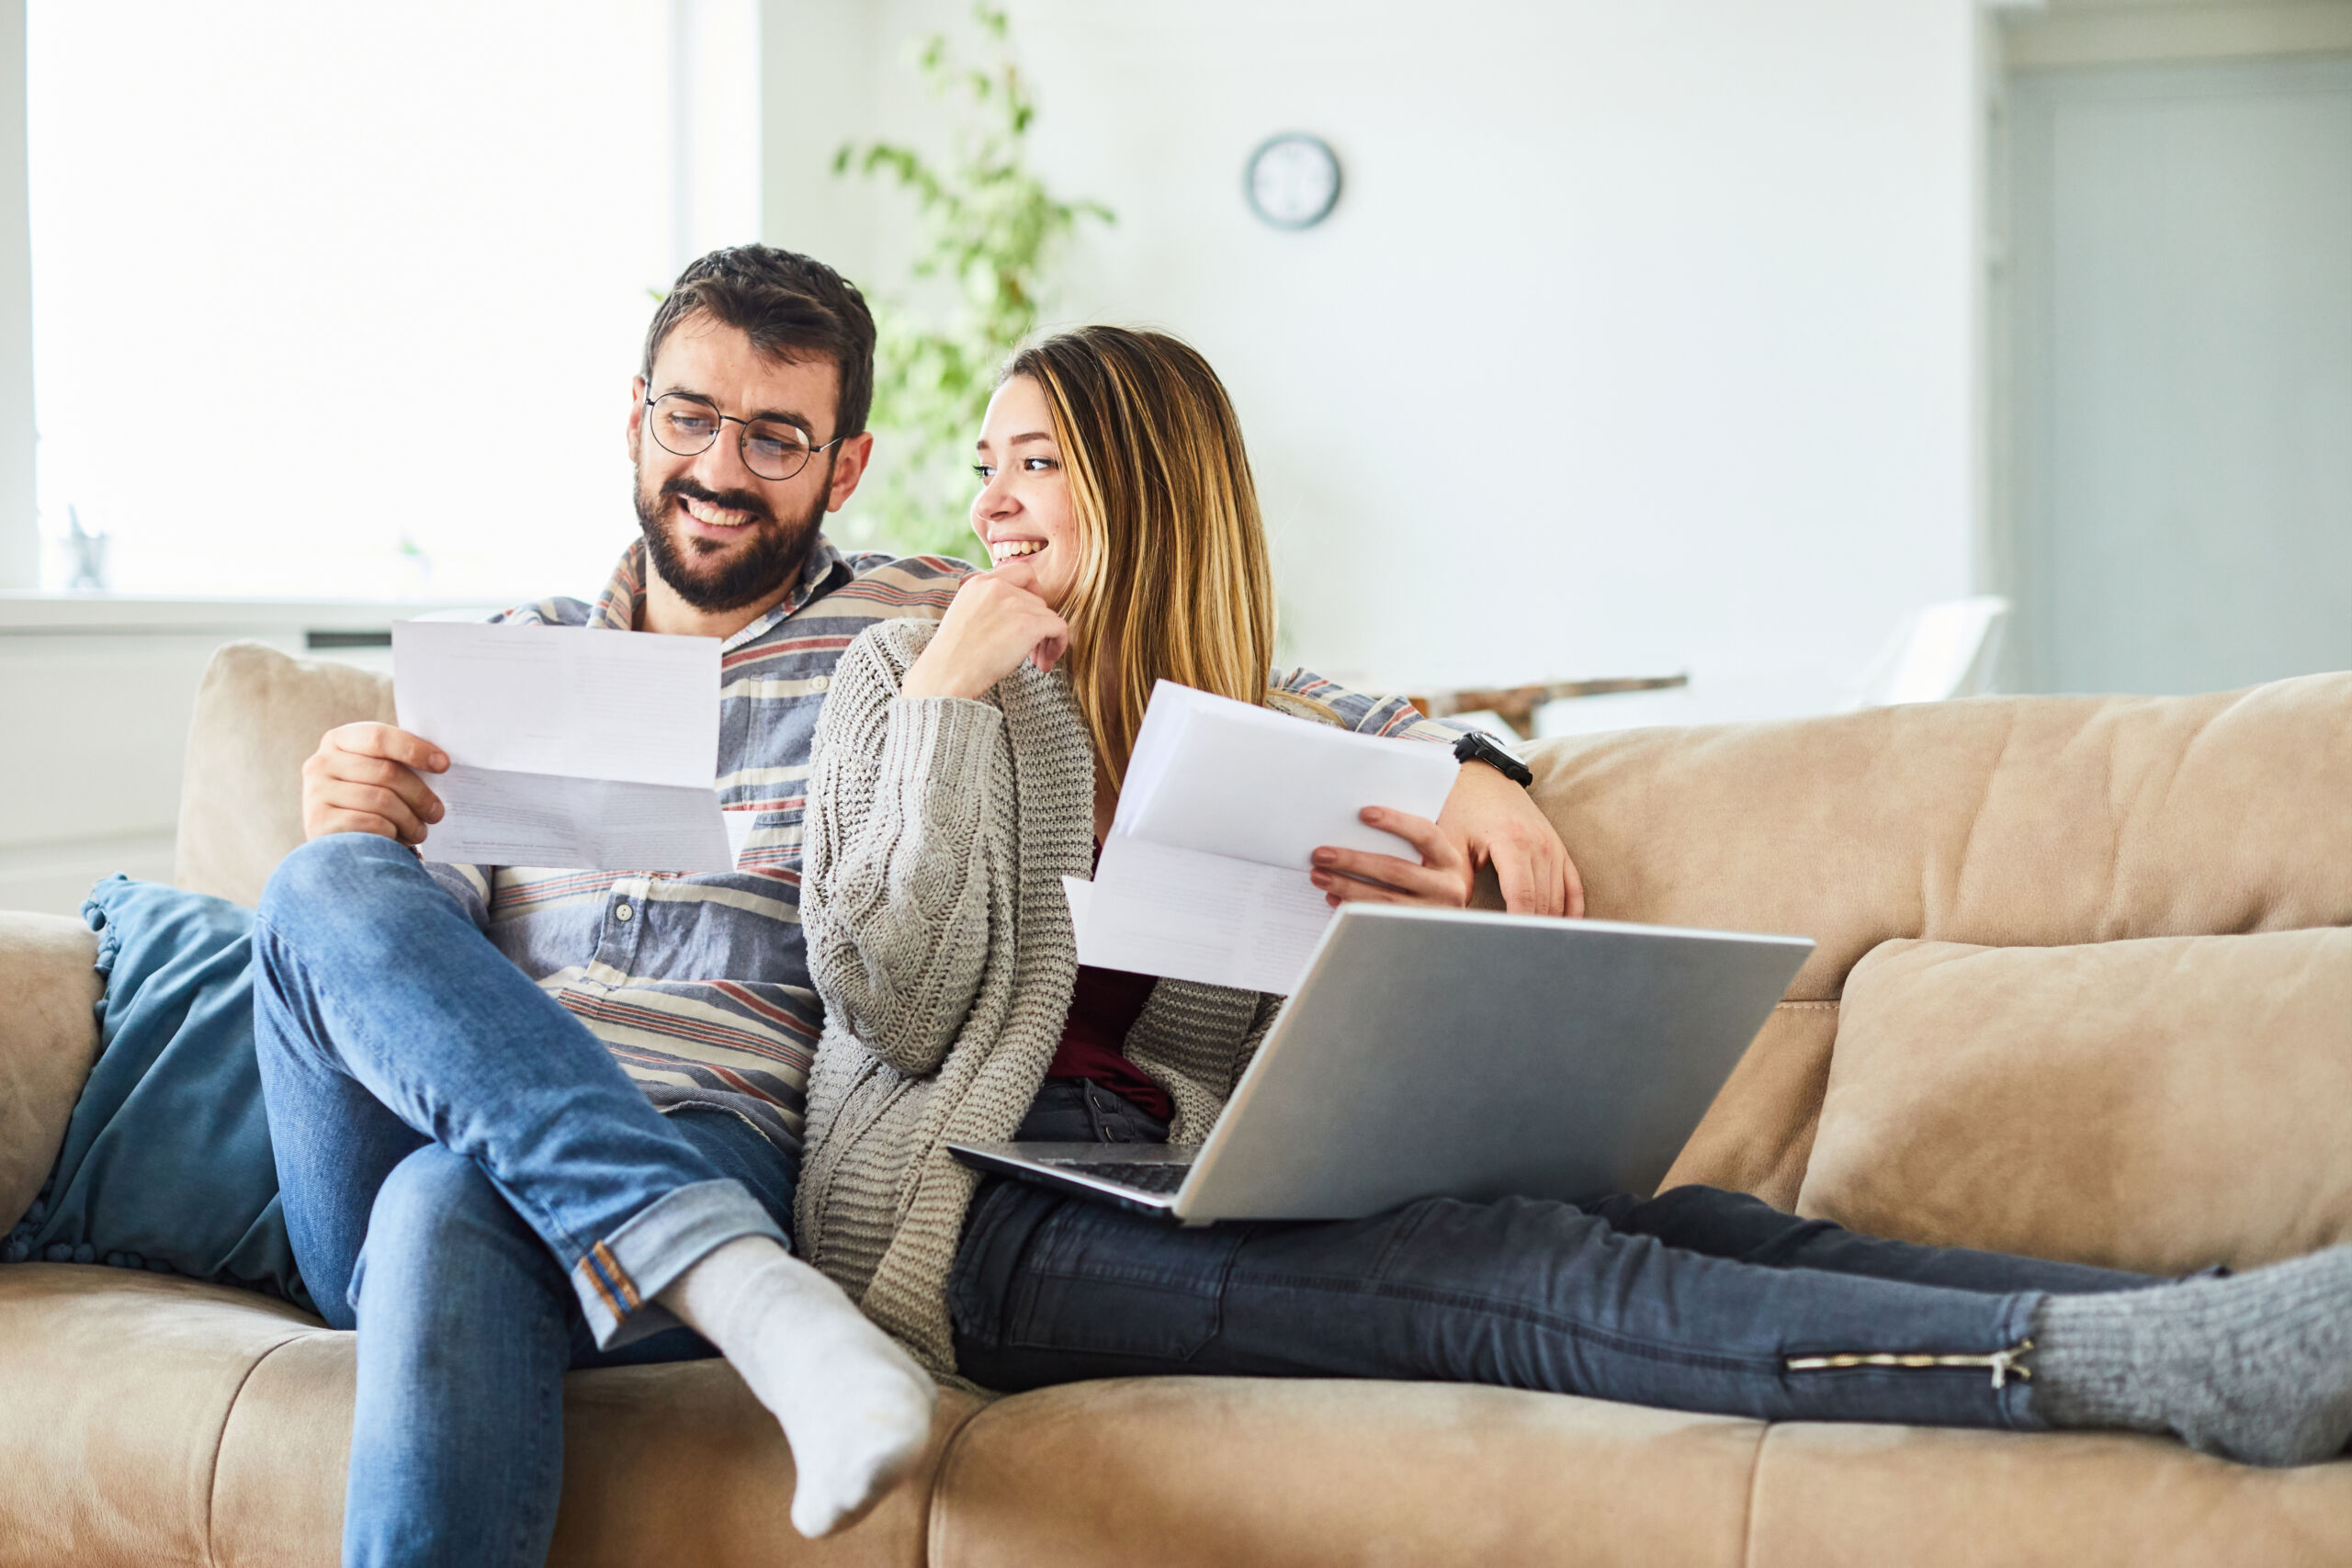 An image of a married couple reviewing their savings together and smiling. Solar Financing or Leasing?